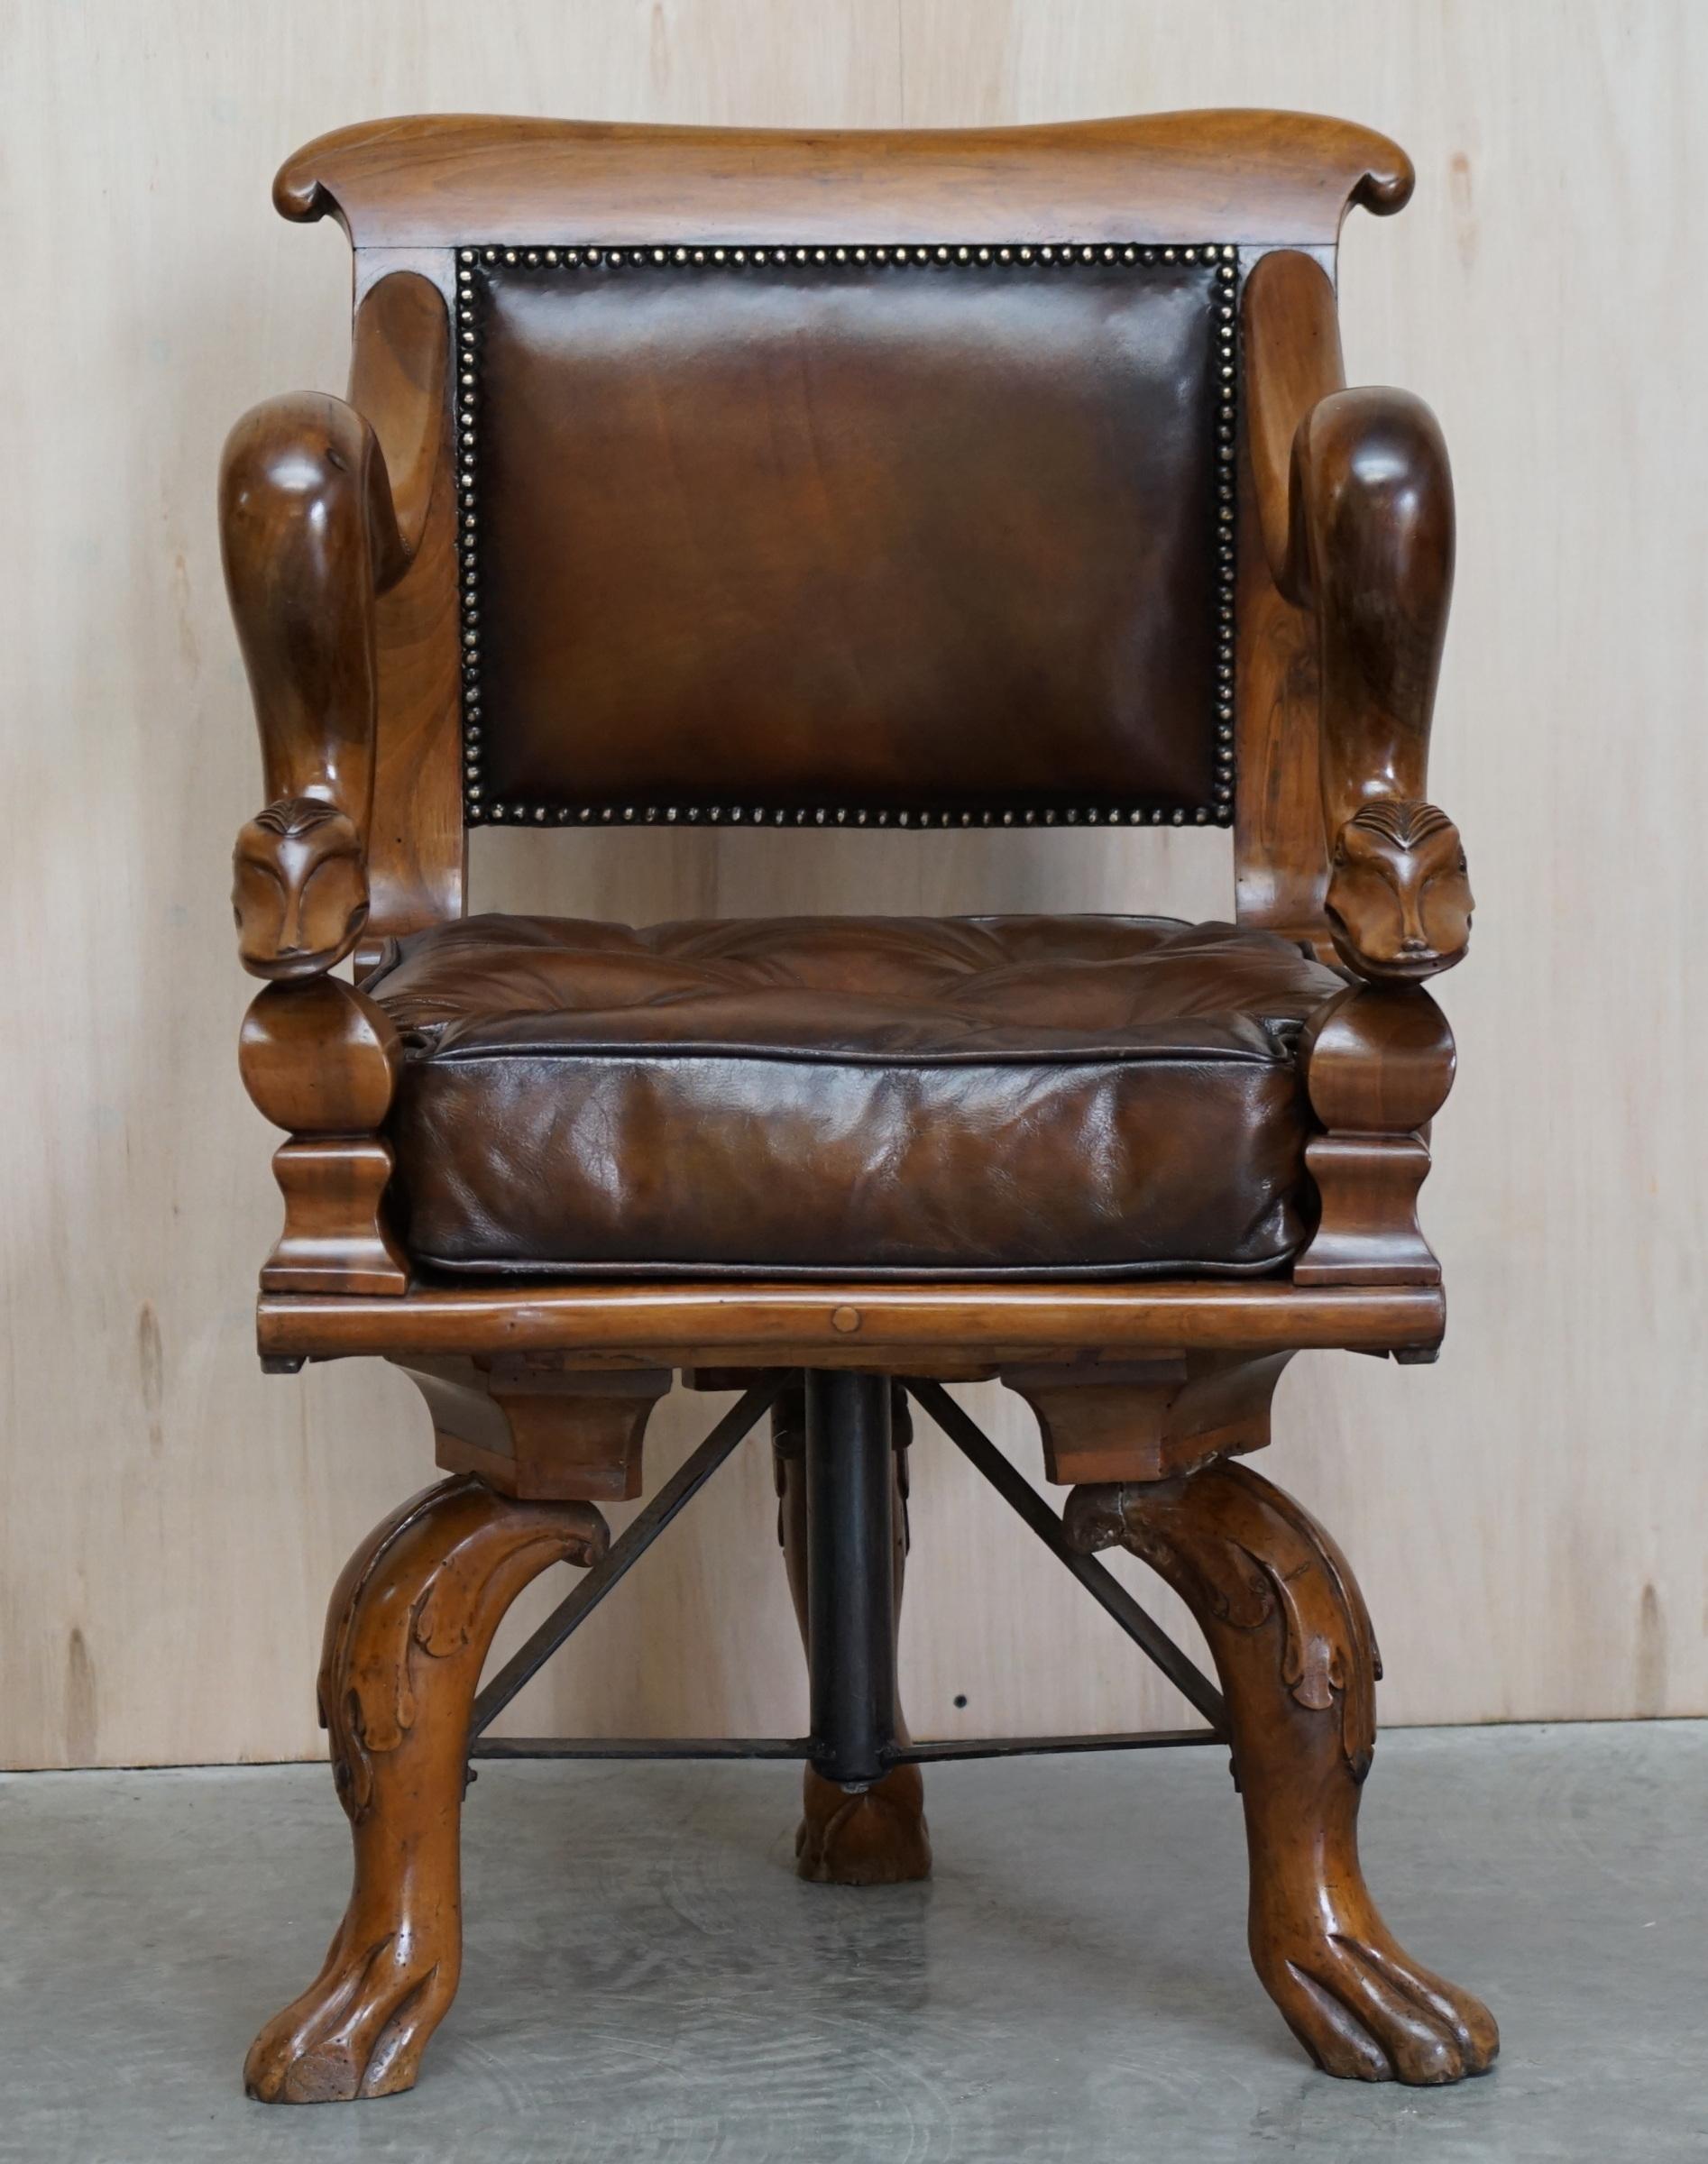 We are delighted to offer this super rare and highly collectable, circa 1830 Italian Venetian, fully restored swivel armchair

What a find! I have never seen another carved with the Dolphin arms like this, its reminiscent of the Pauley CIE Etc